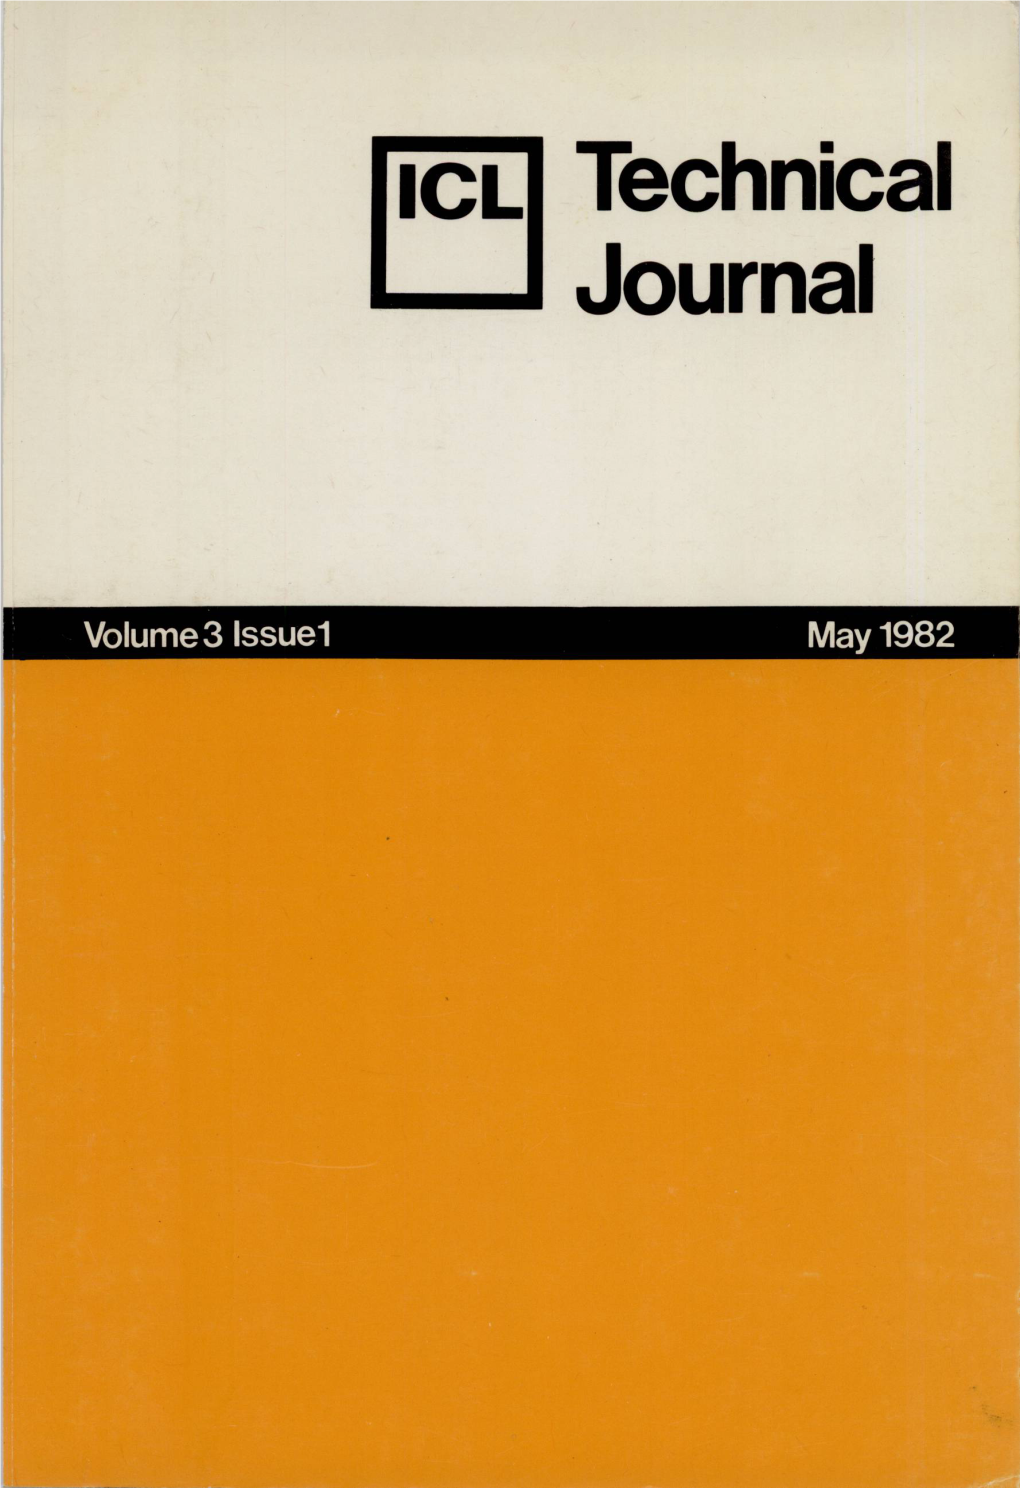 ICL Technical Journal Volume 3 Issue 1